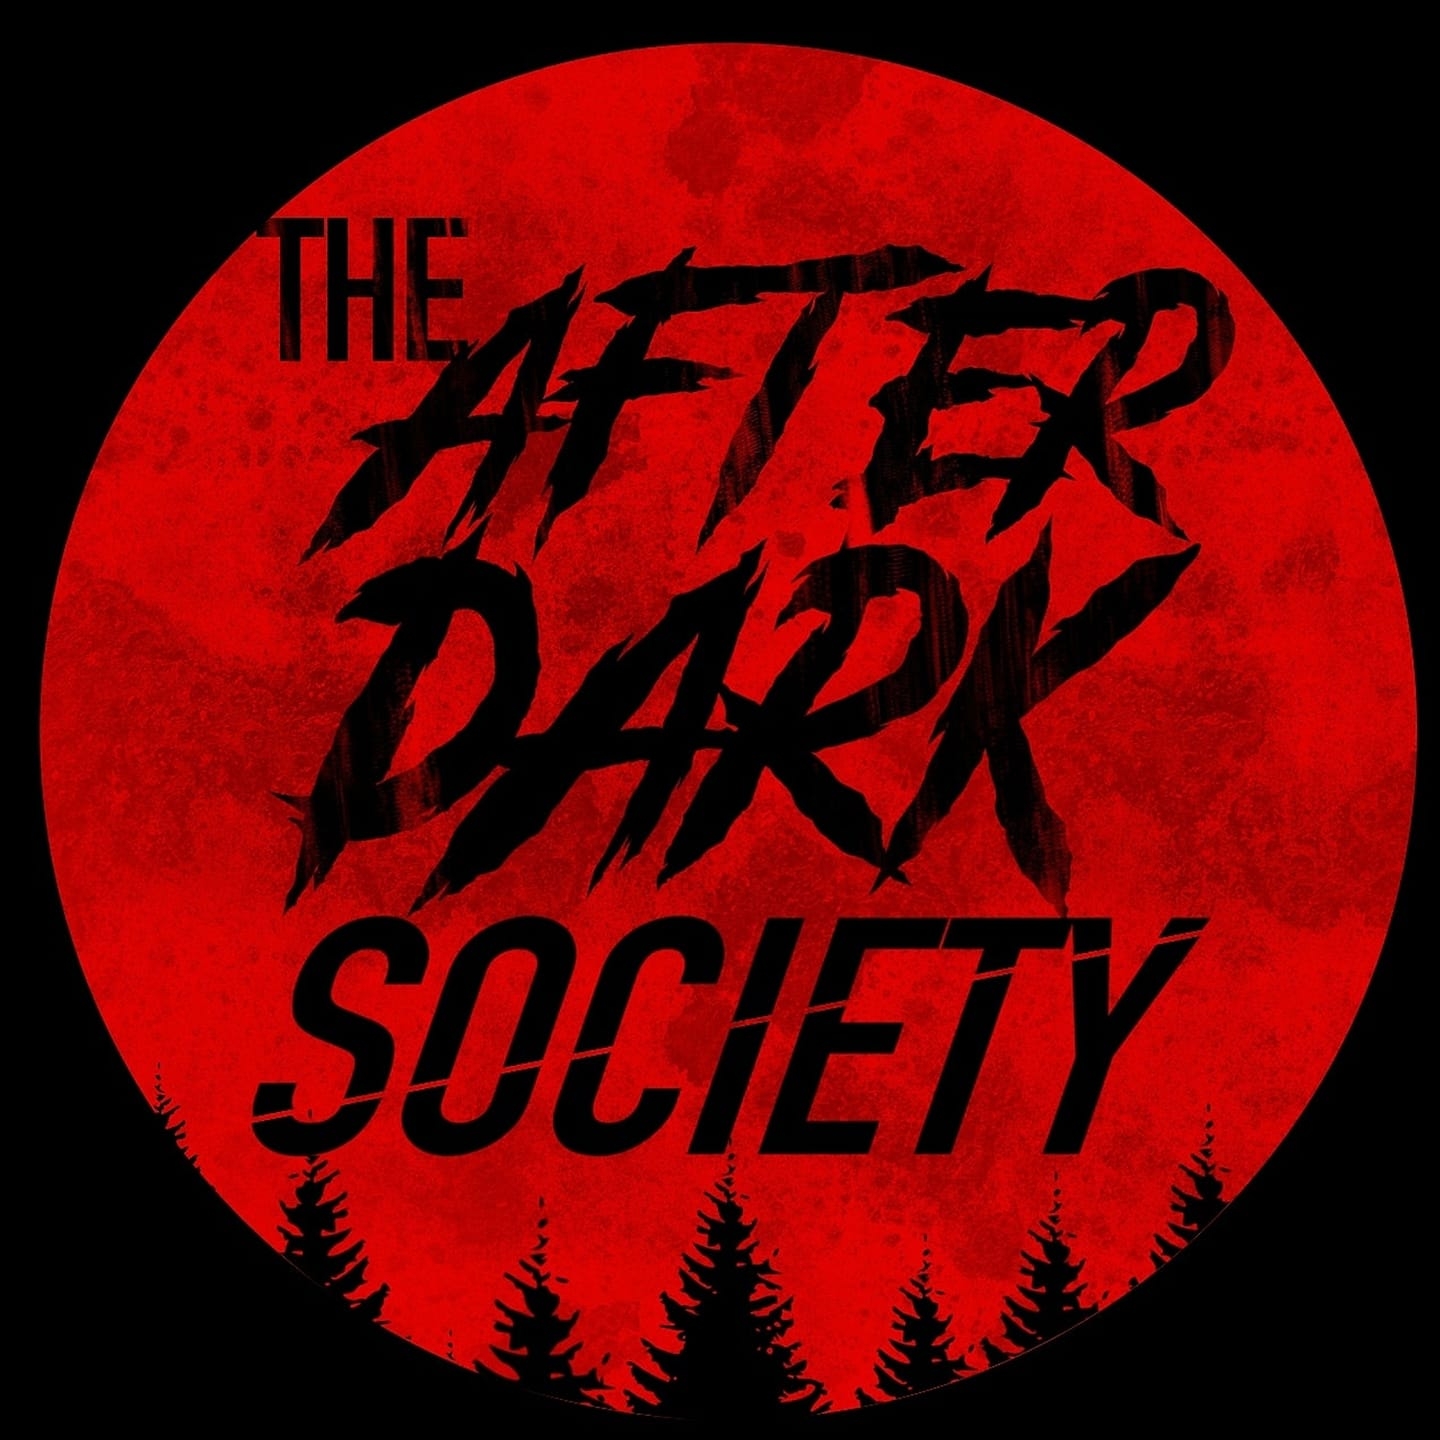 Art for Wickerman by The After Dark Society